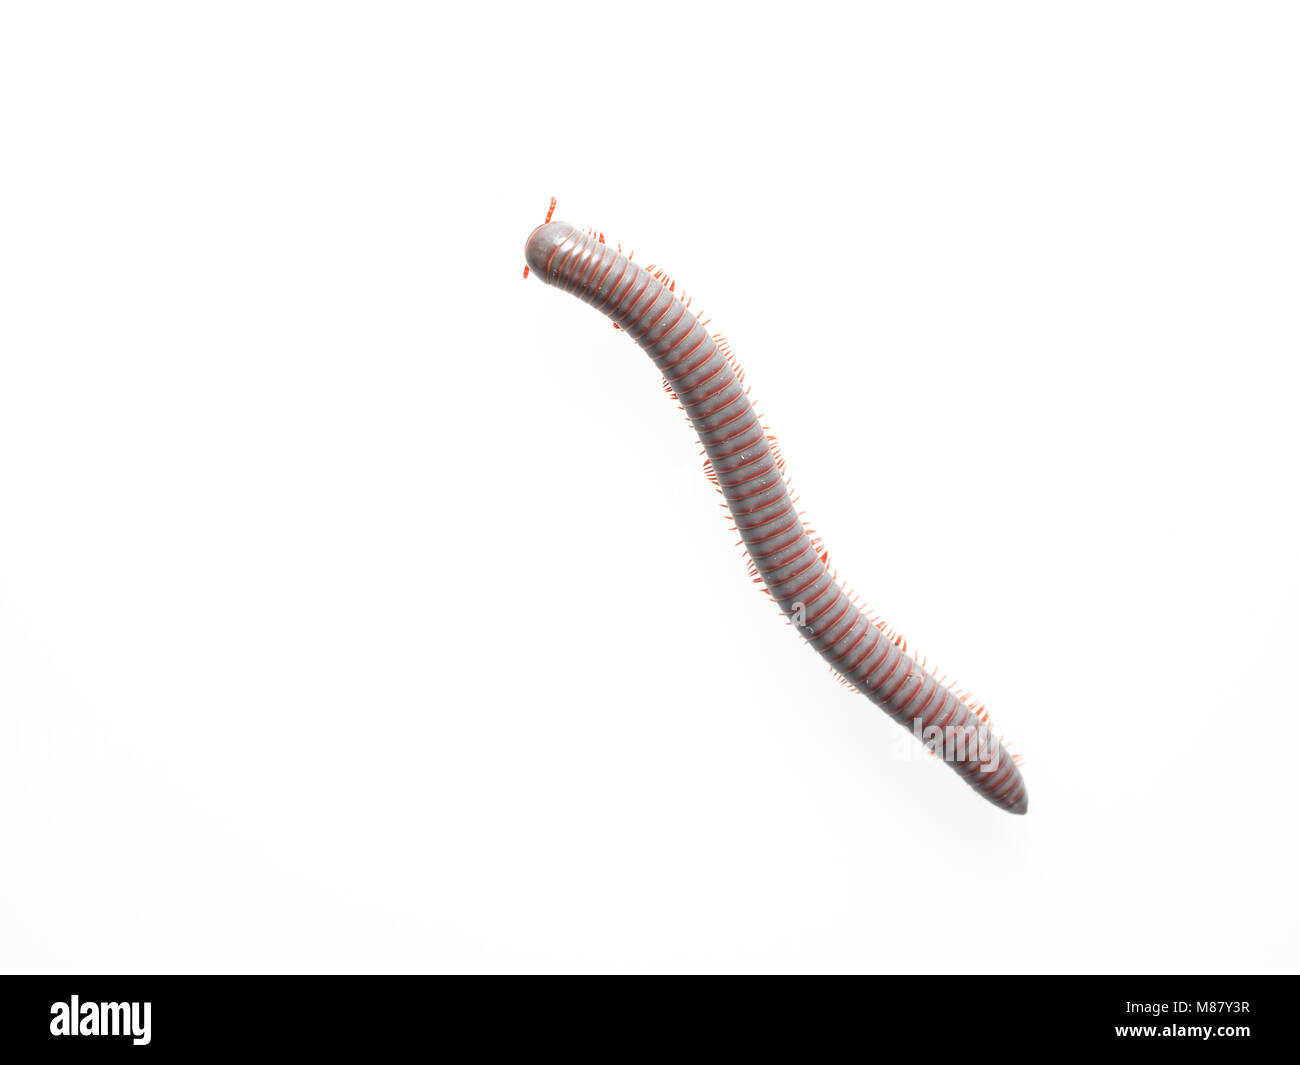 Millipedes, insect with long body and many legs look like ...